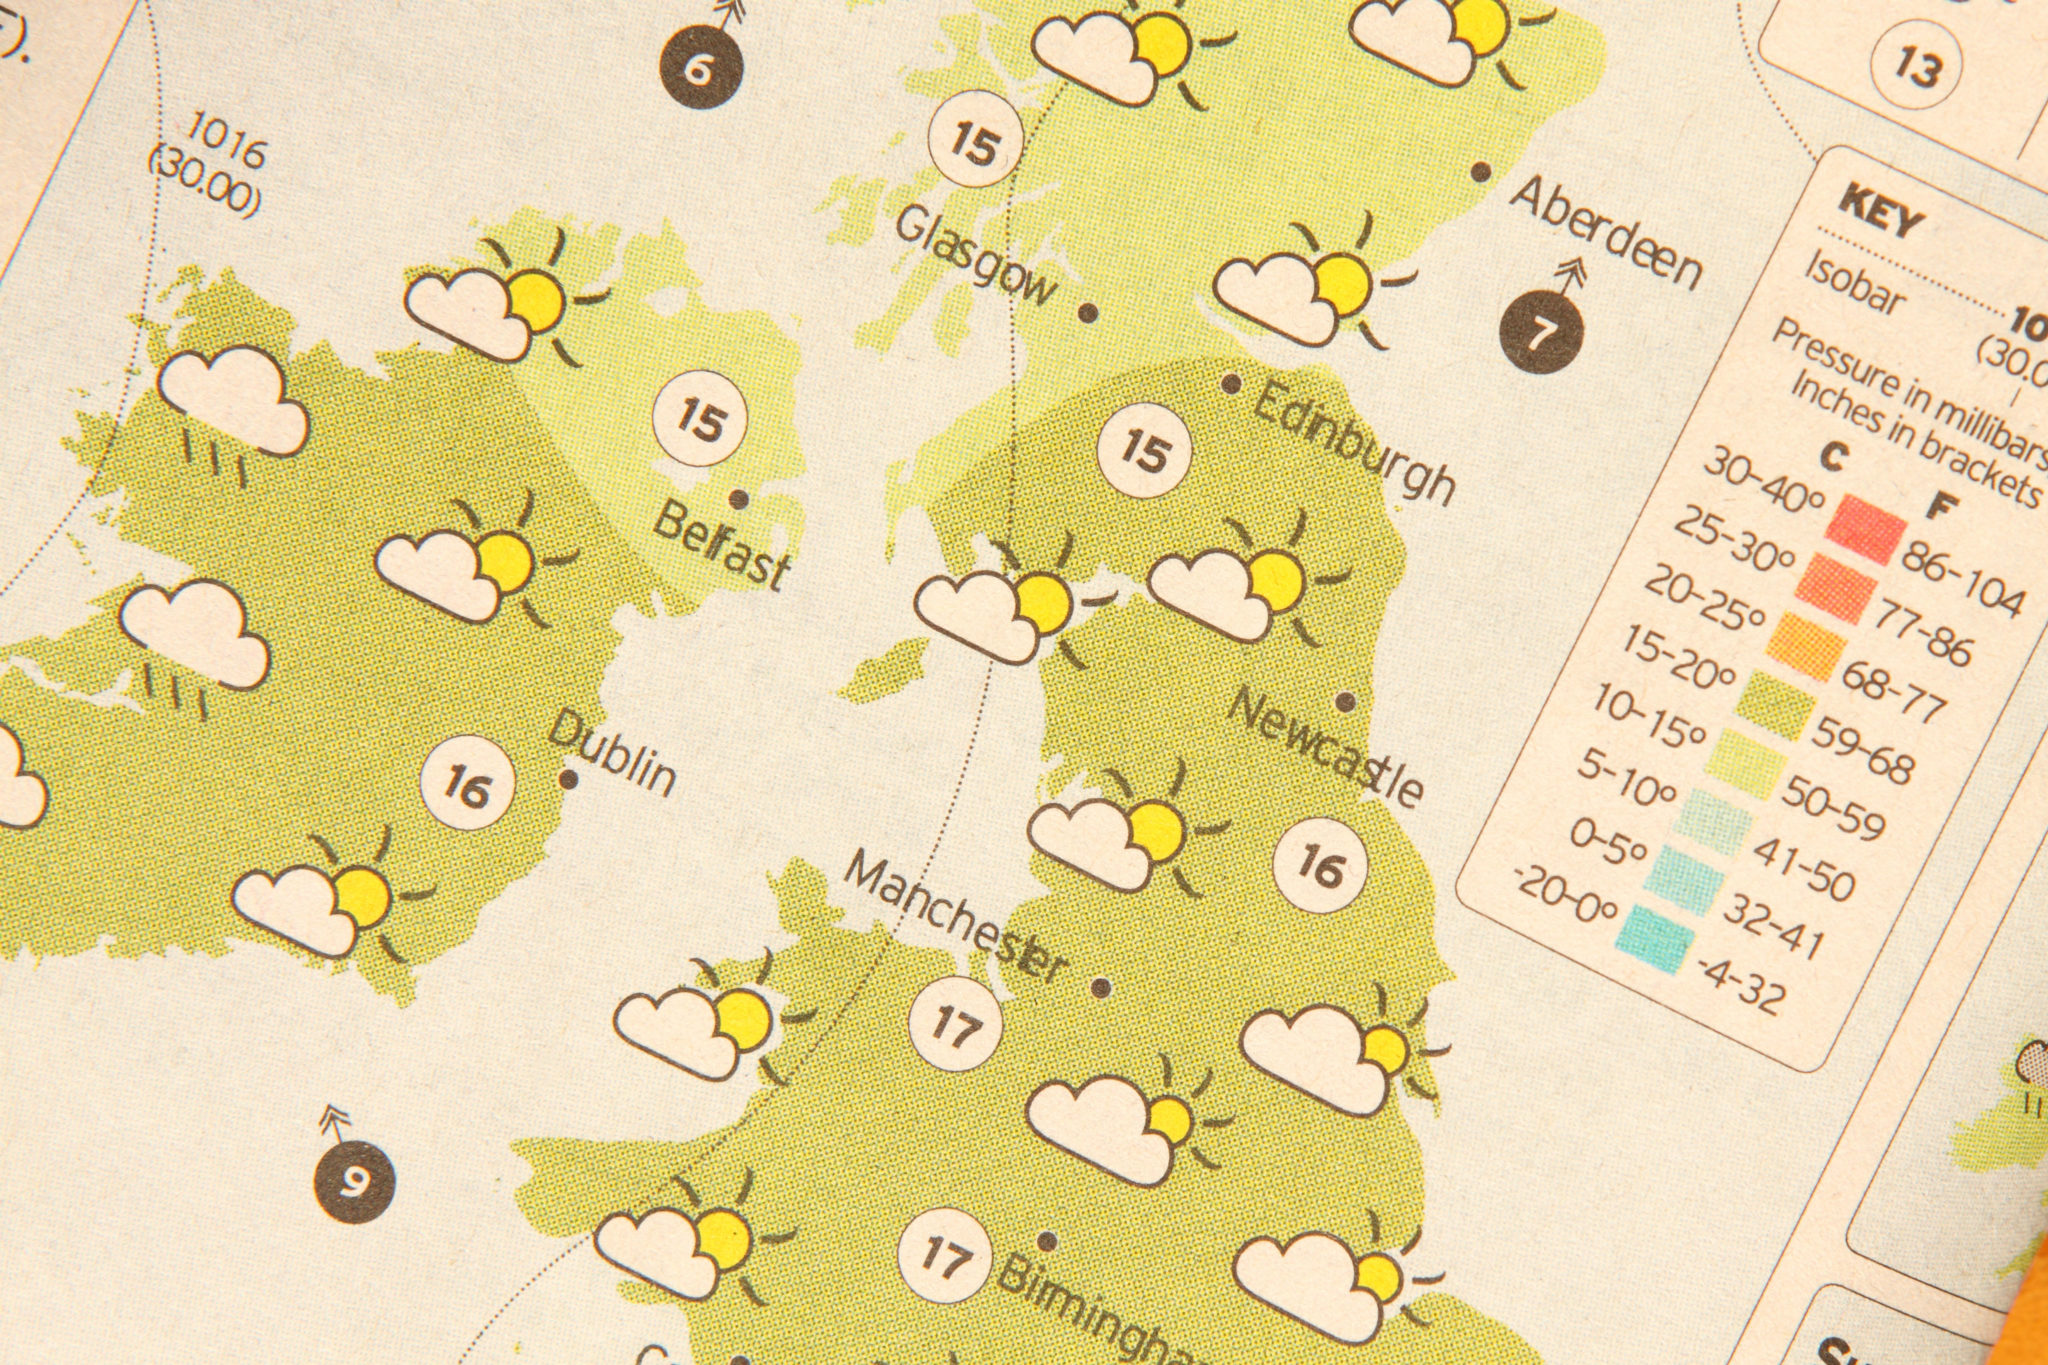 A weather forecast map in a newspaper in September 2011. 